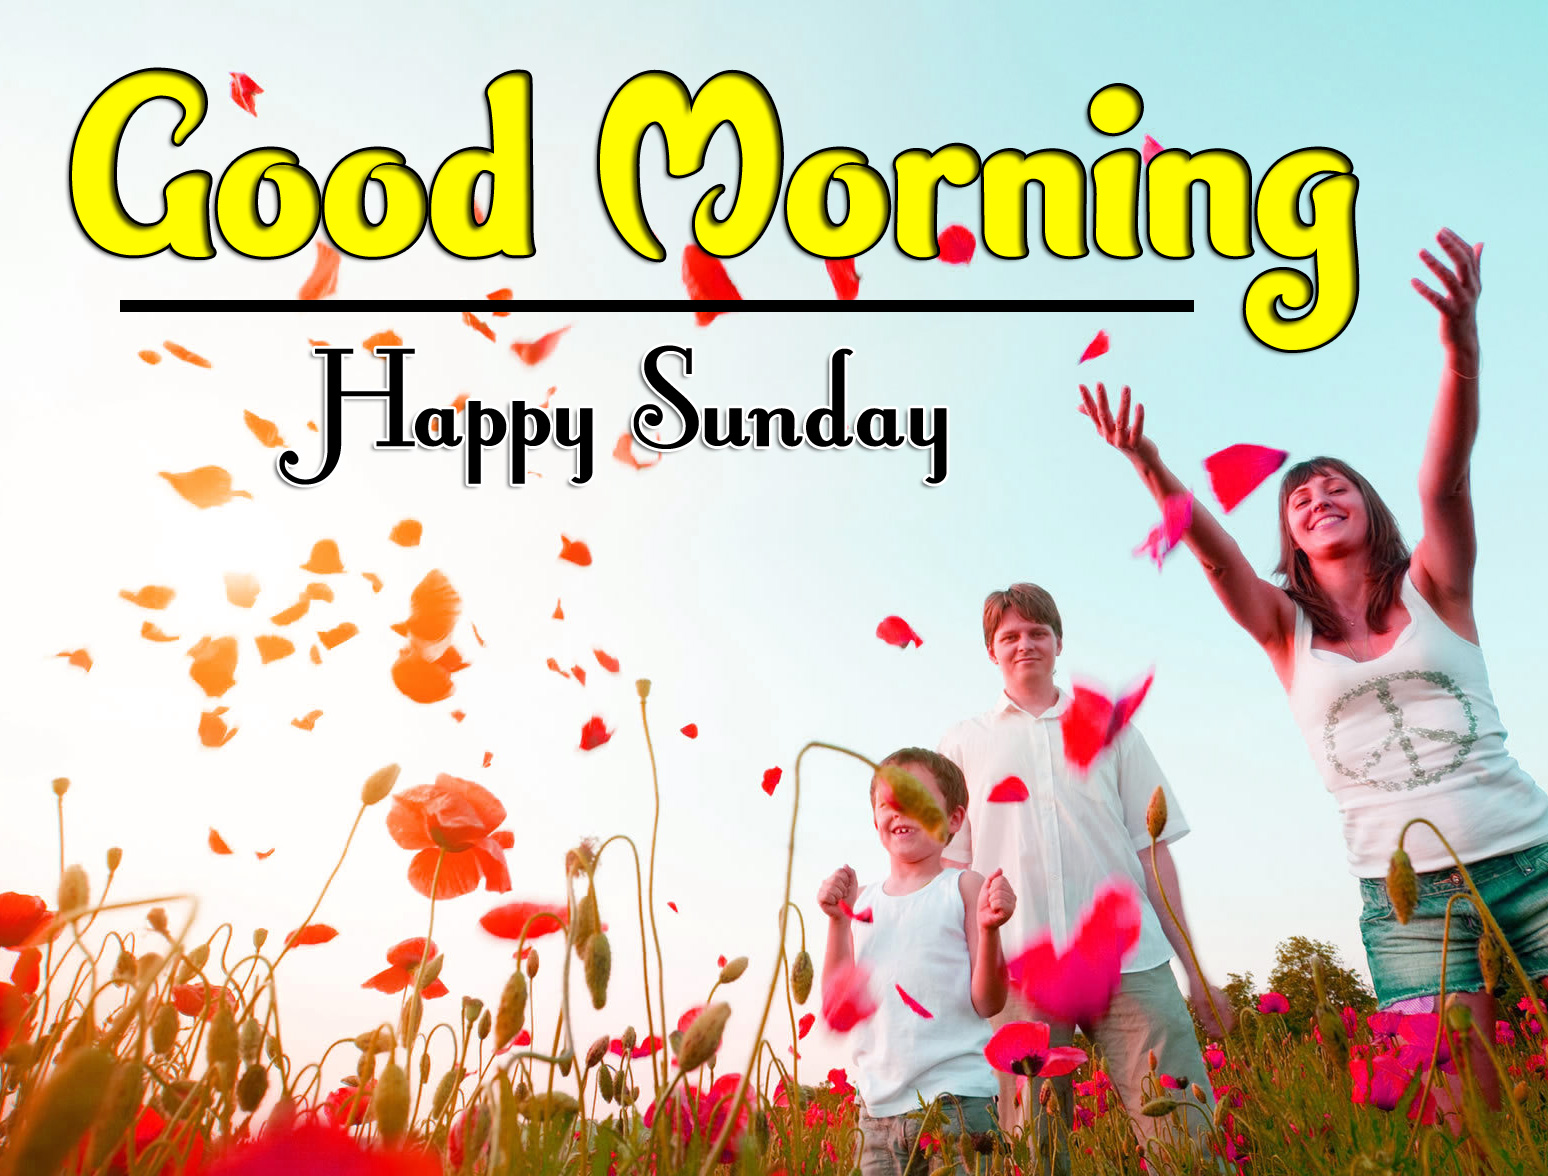 Sunday Good Morning Wishes Wallpaper Free Download 